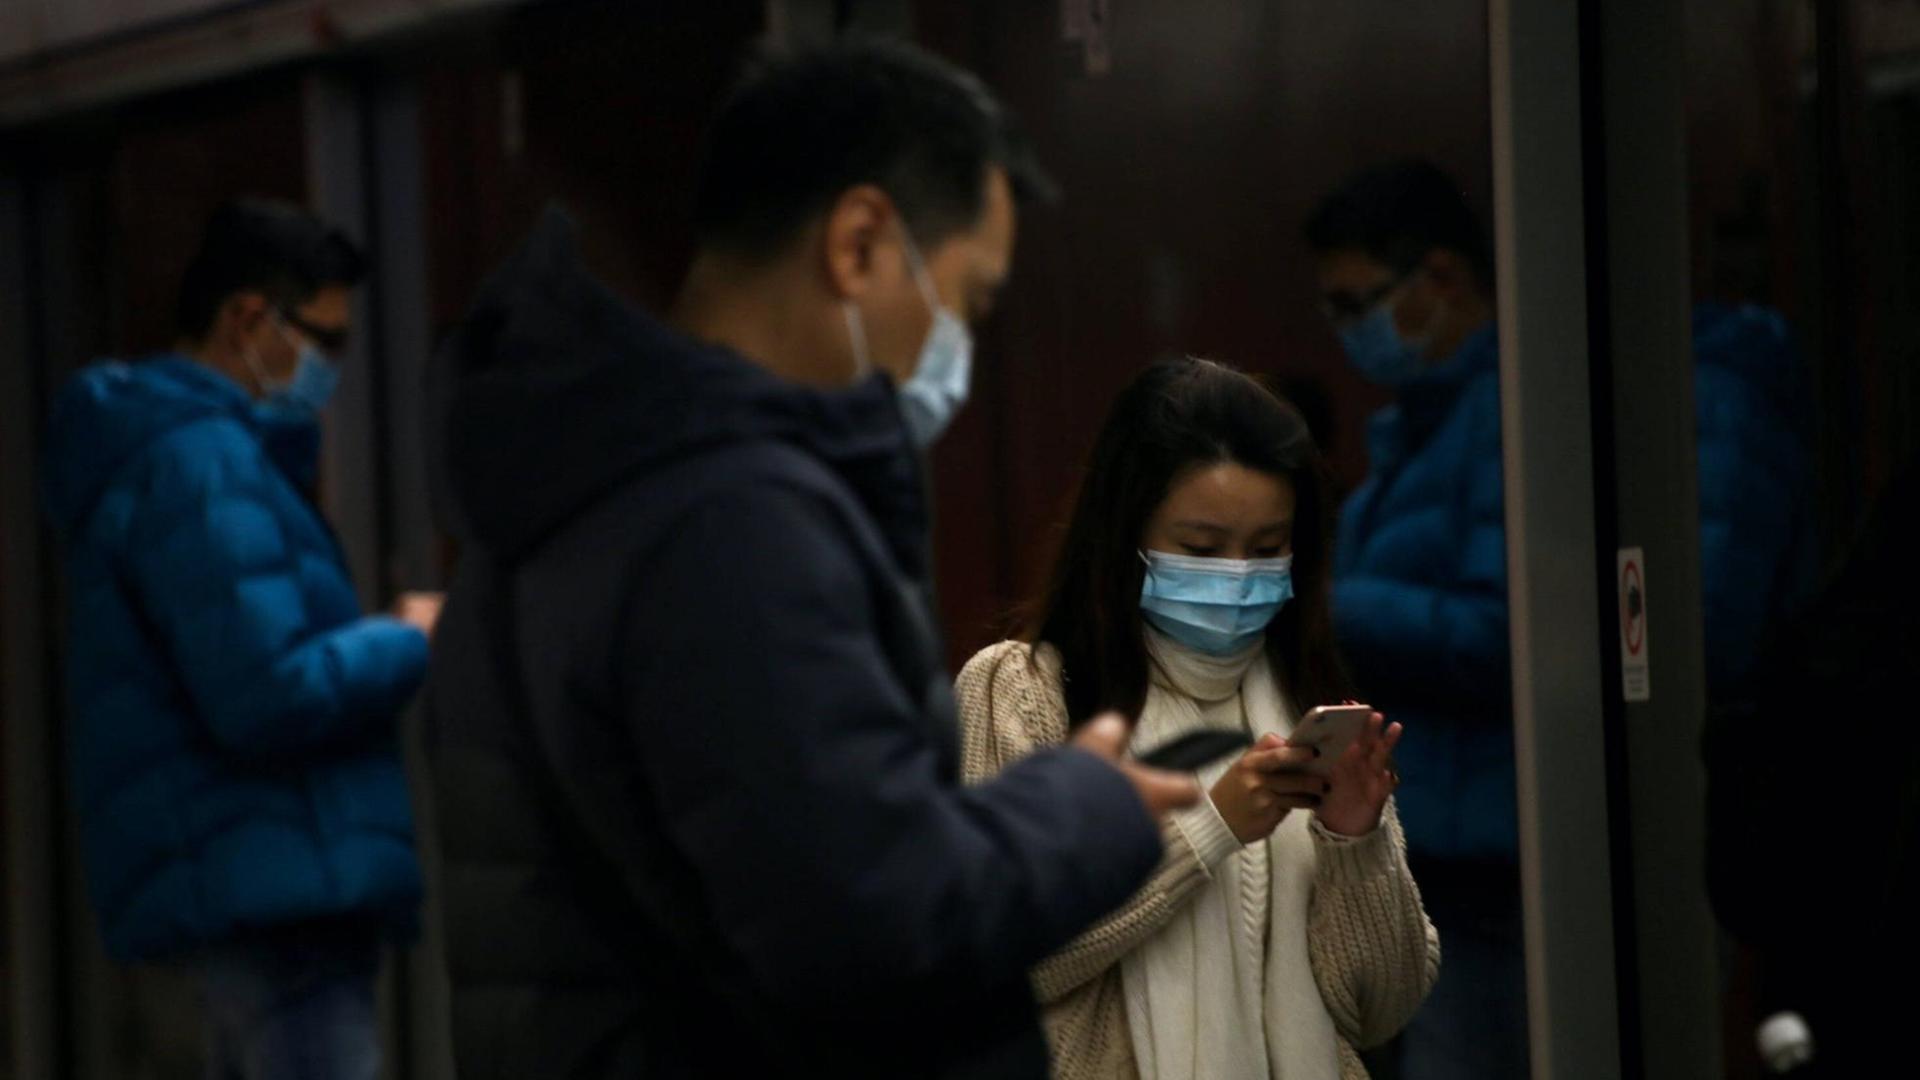 January 28, 2020, Hong Kong: A woman and other passengers wear face masks as they wait for the MTR, following reports of the Wuhan Corona virus in Hong Kong..The Wuhan Corona virus is a new and highly infectious SARS-strain virus that originated in the Hubei province of China and has been traced back to an animal market in the city of Wuhan. Hong Kong PUBLICATIONxINxGERxSUIxAUTxONLY - ZUMAs197 20200128zaas197093 Copyright: xKatherinexChengx